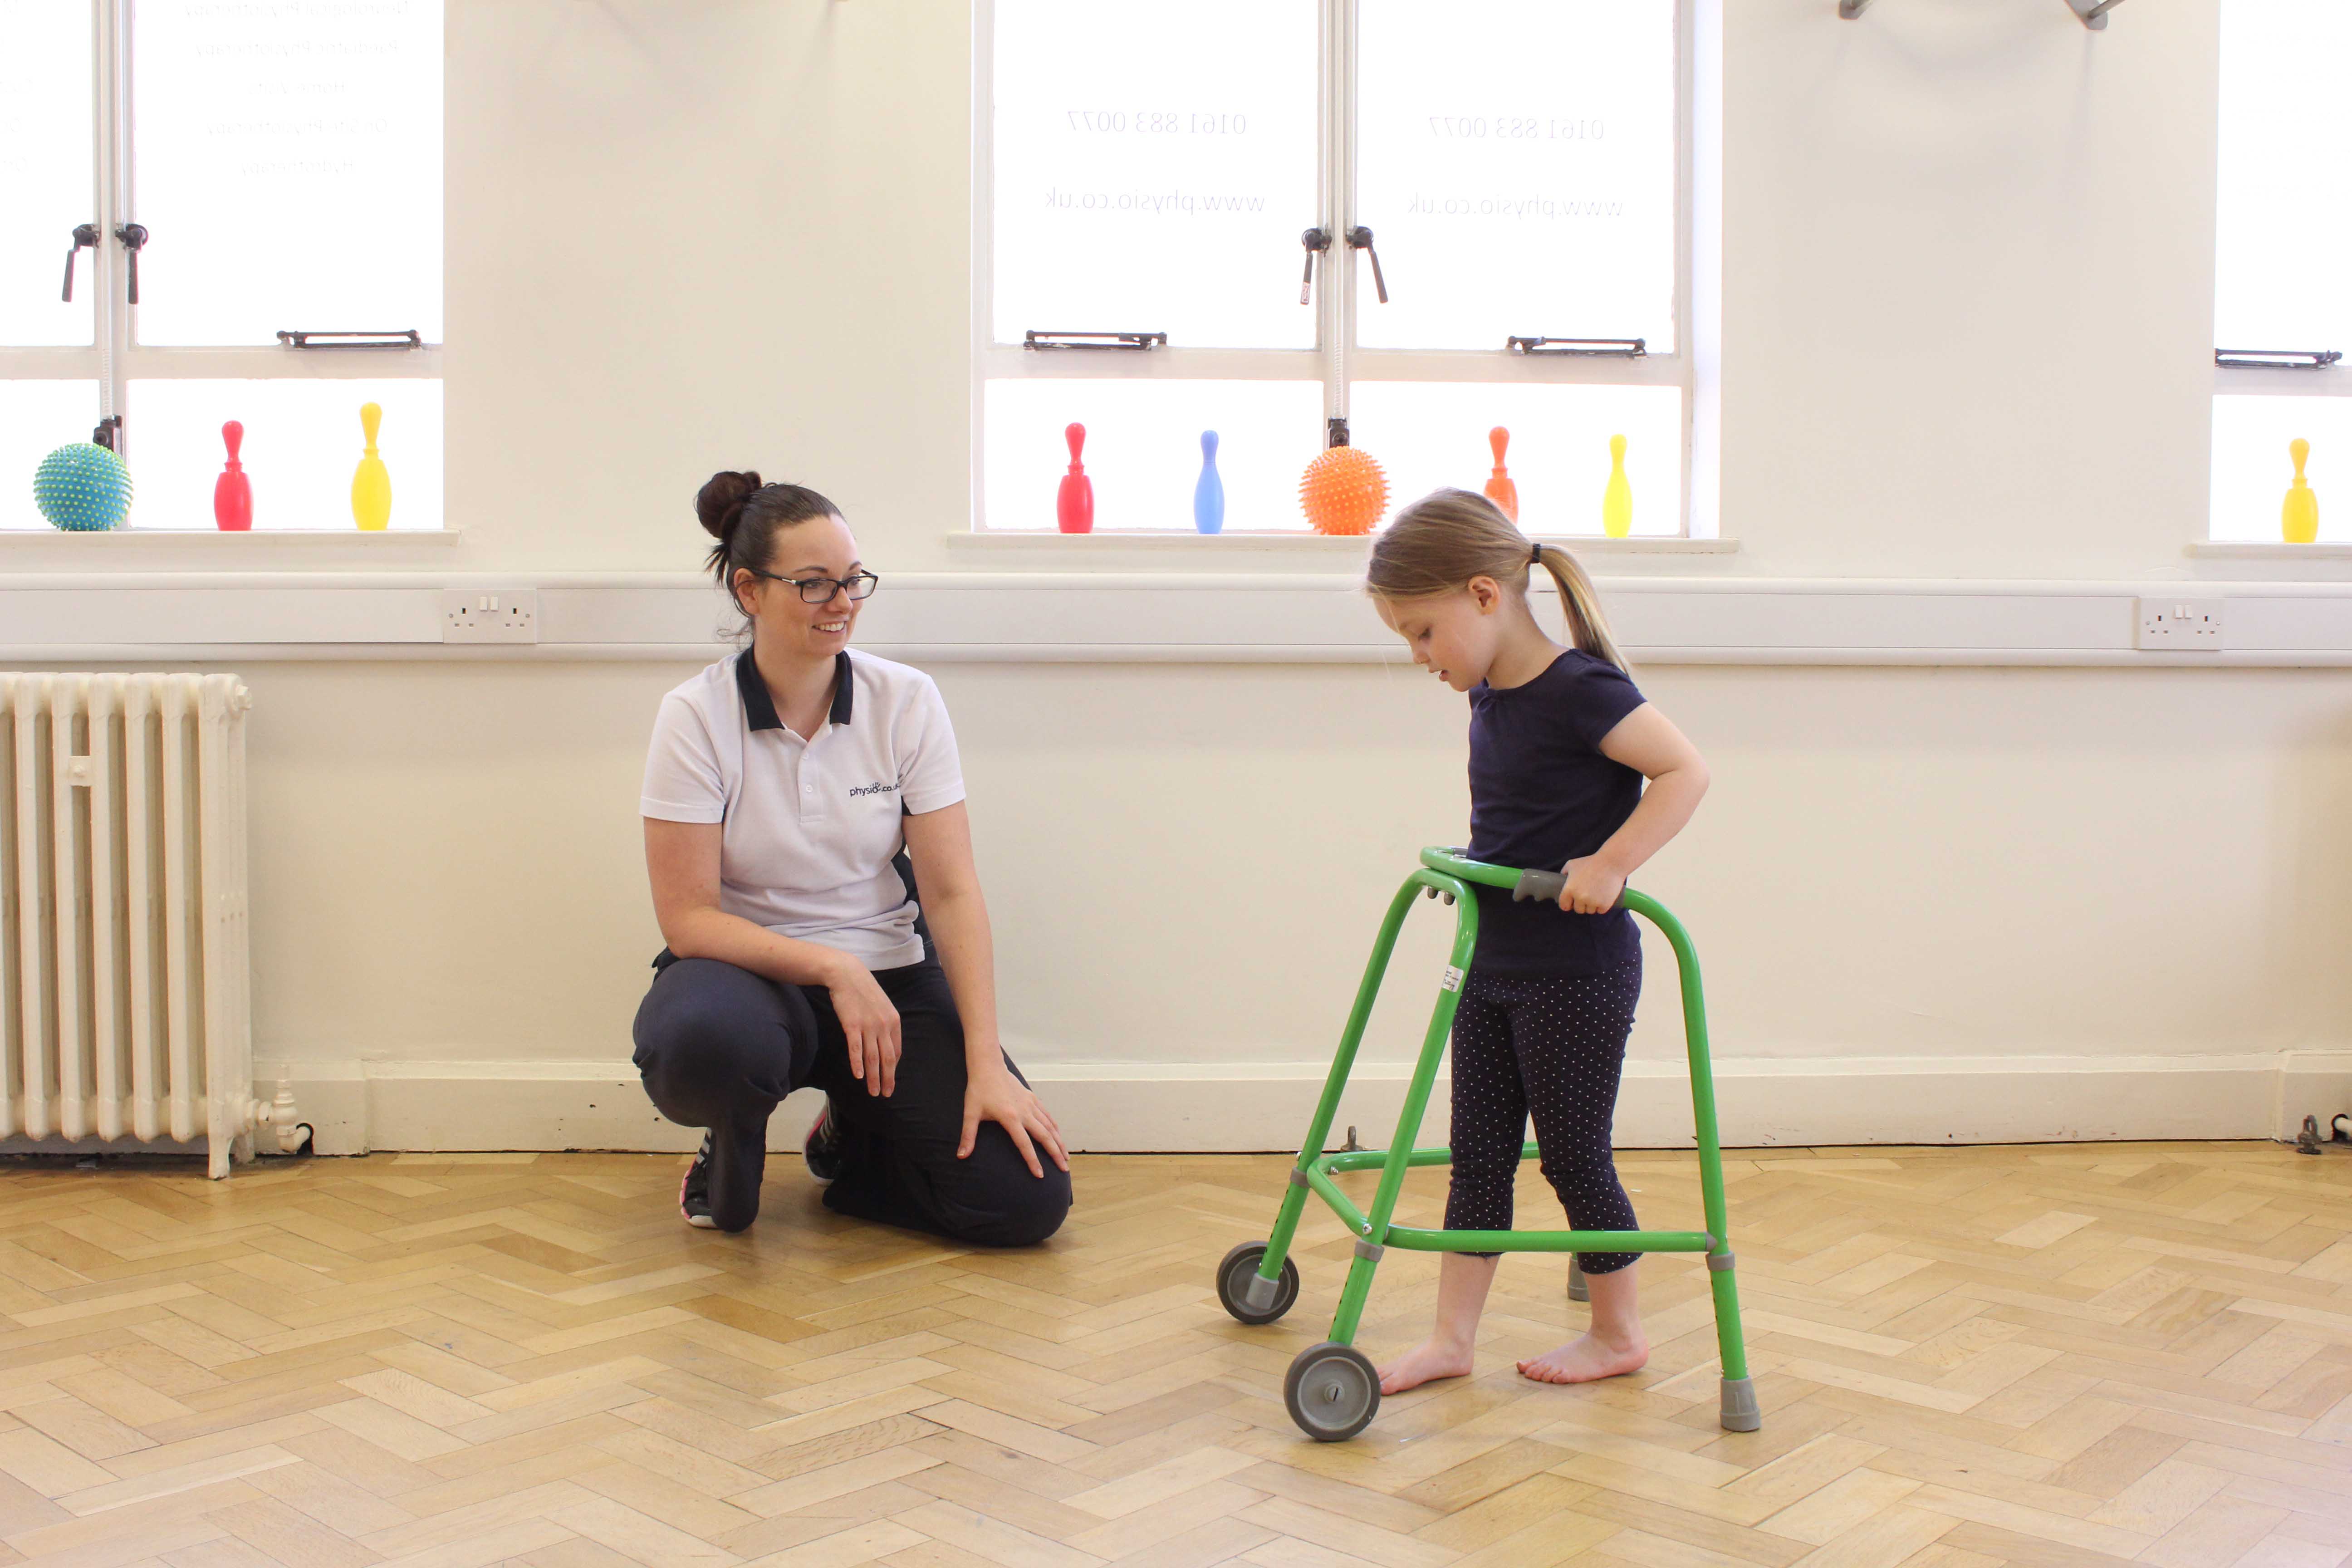 Mobilisation exercises using a wheeled frame under supervision of an experienced physiotherapist